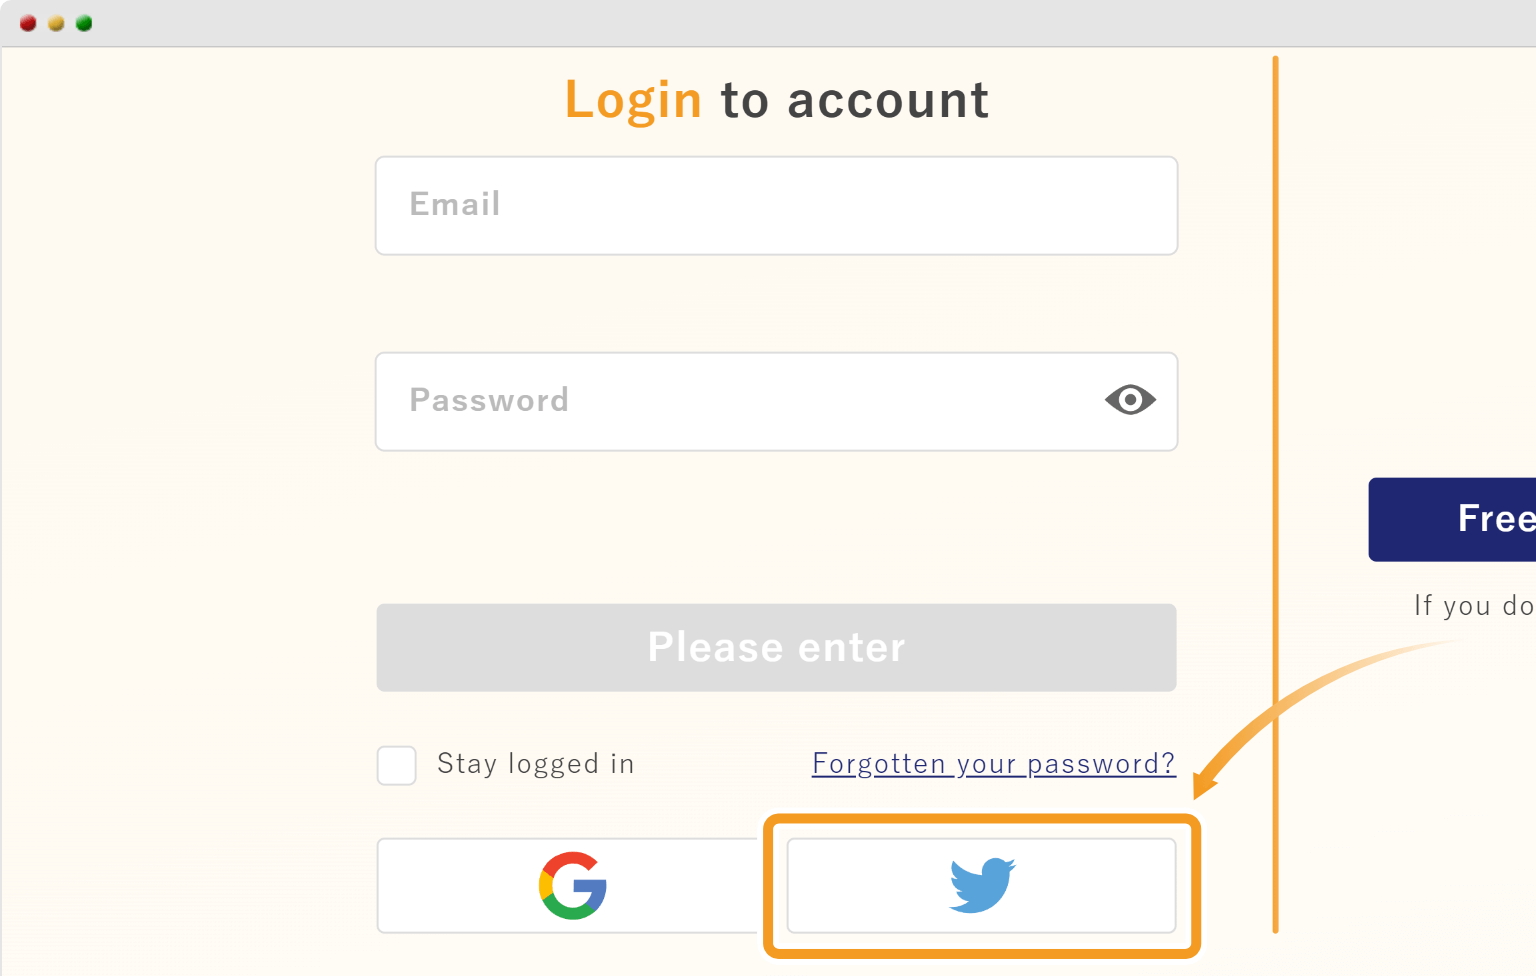 Login with Twitter ID